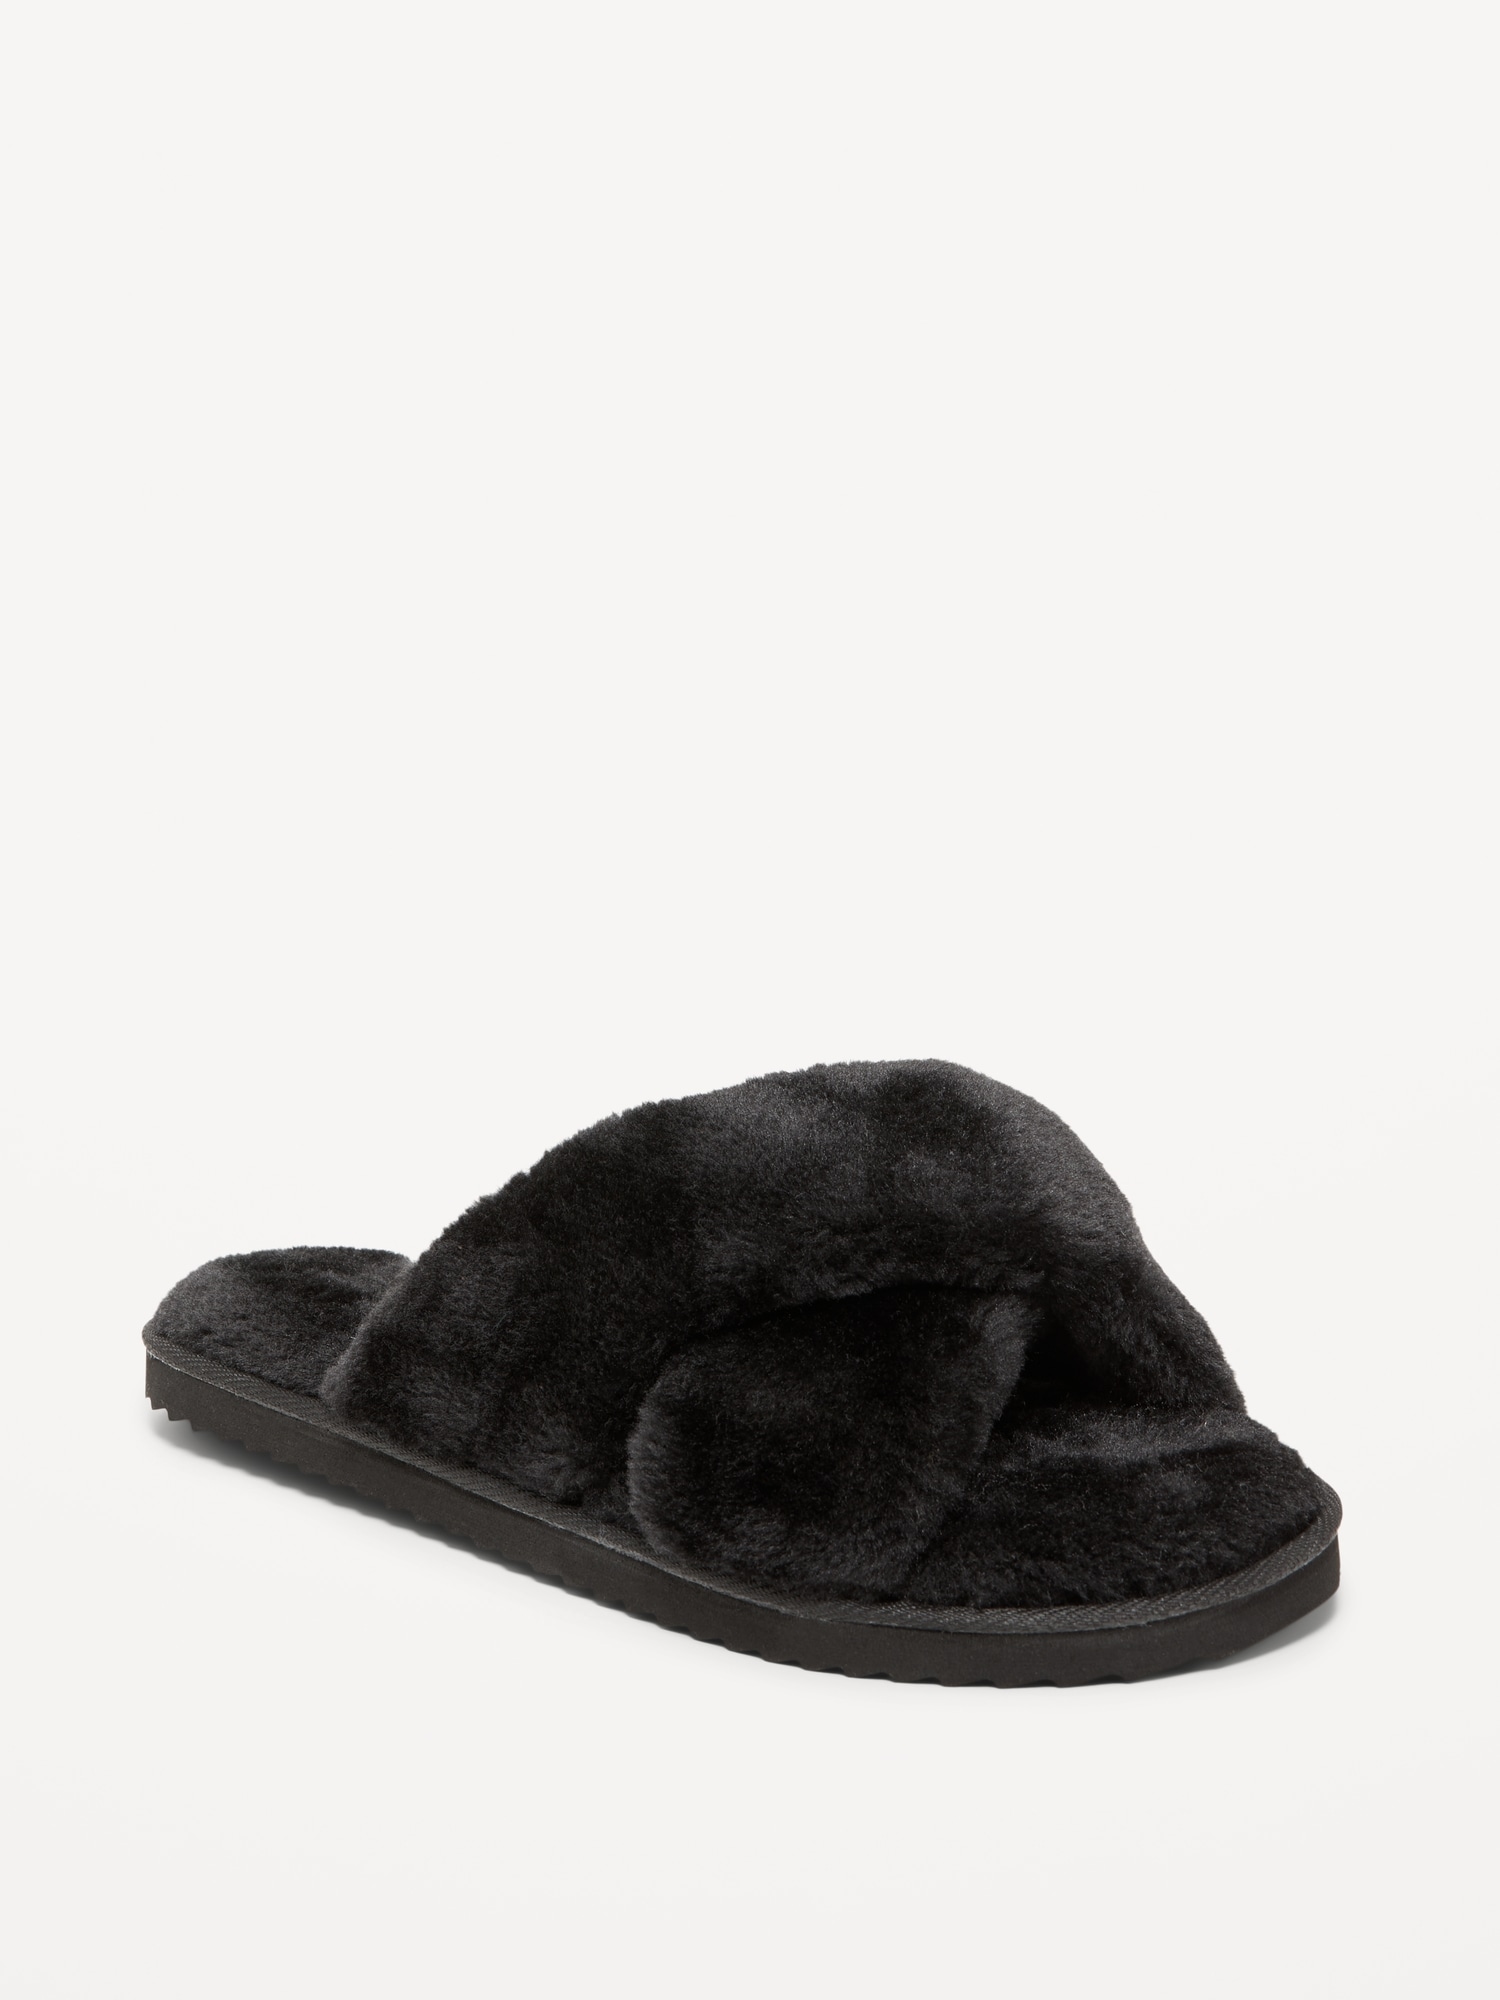 Cozy Faux Fur Slide Slippers | Old Navy